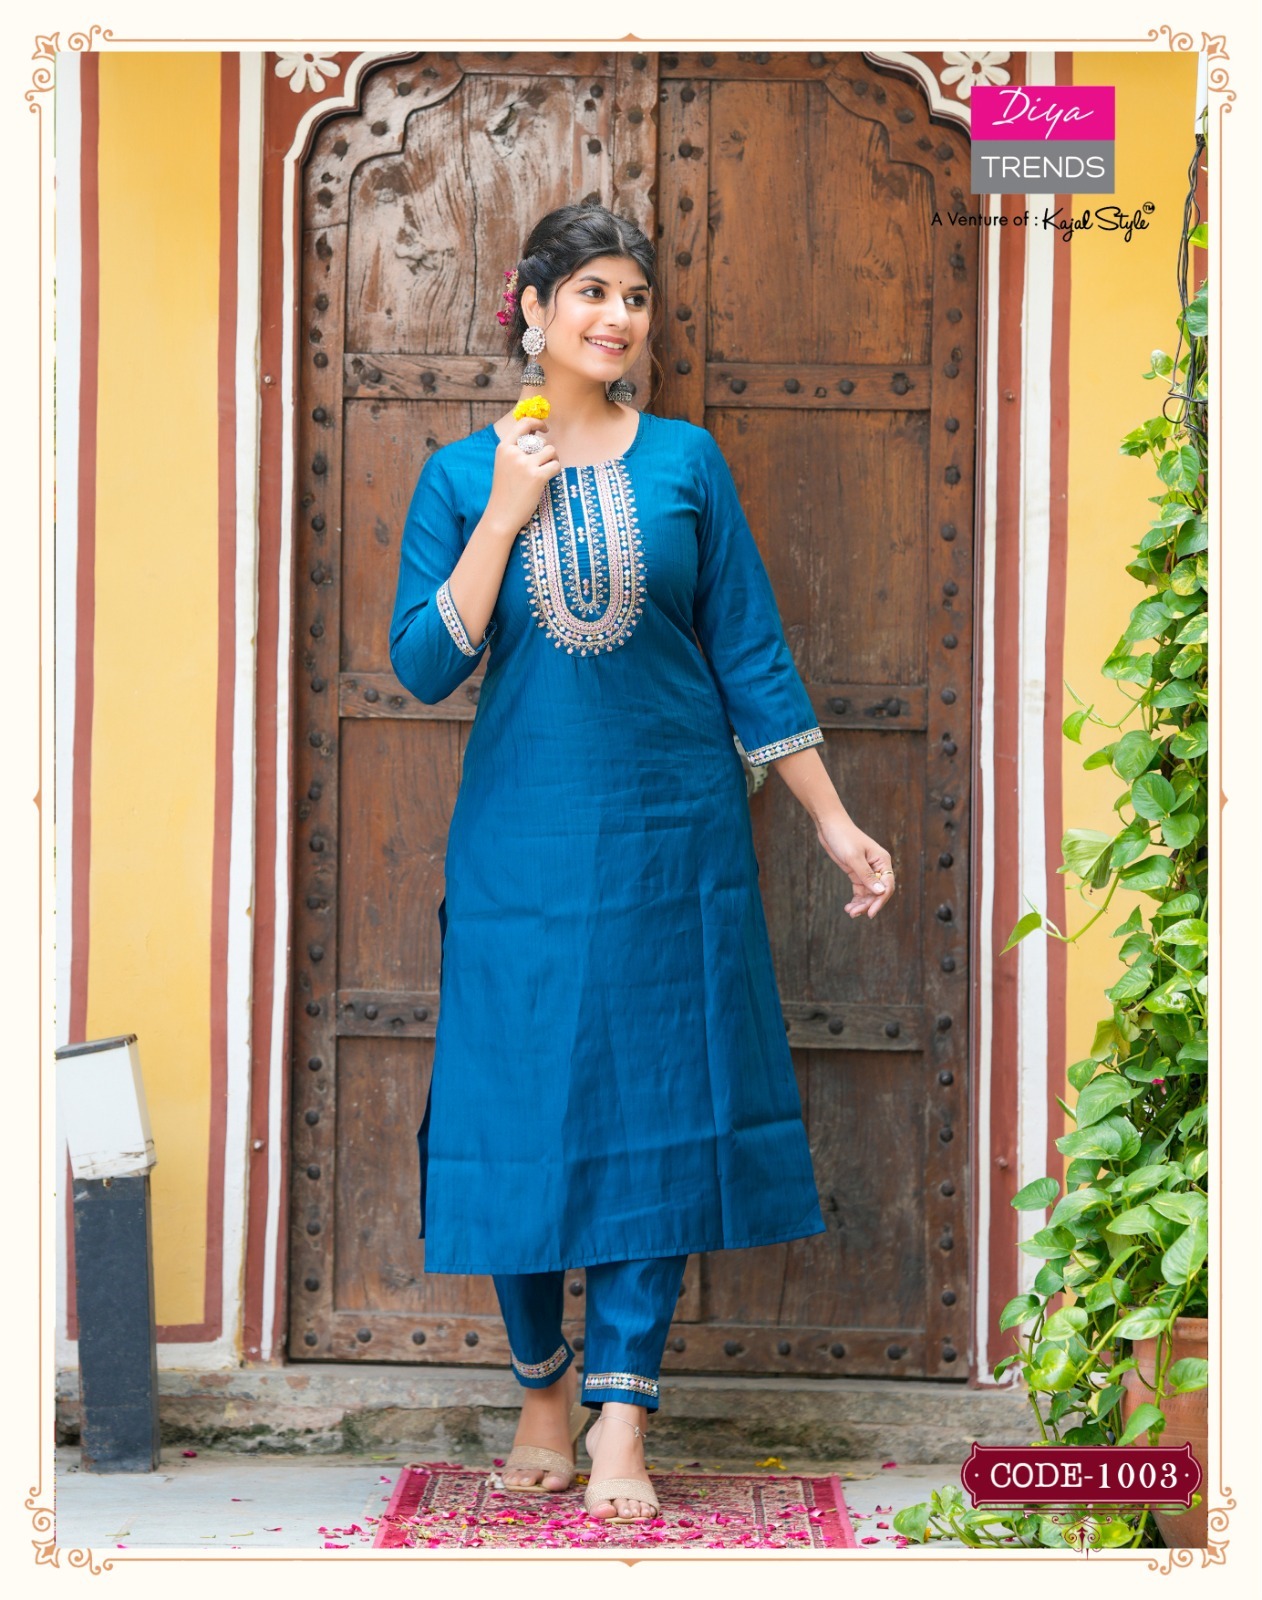 Bluehills First Date New Side Cut Rayon Latest Trends Kurtis Concepts  Wholesale Price Surat